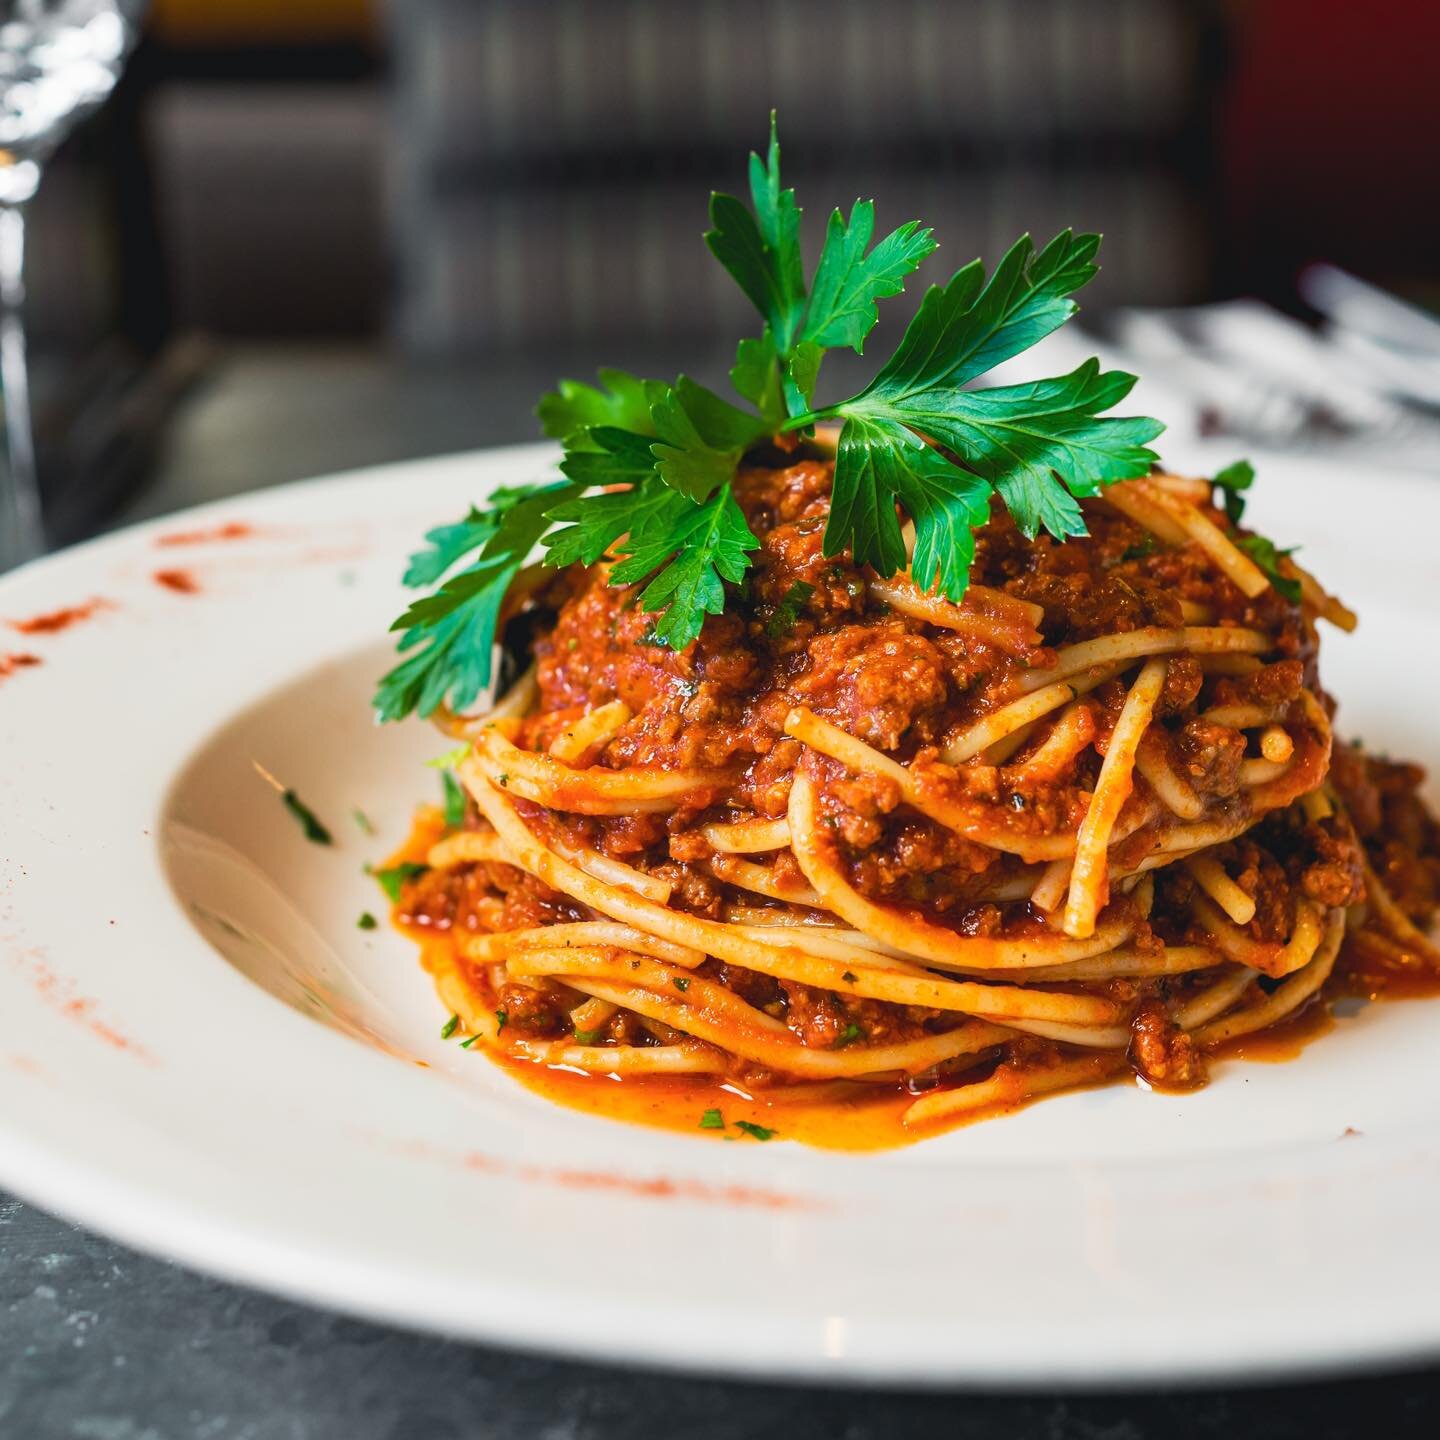 𝐆𝐨𝐨𝐝 𝐅𝐨𝐨𝐝, 𝐆𝐨𝐨𝐝 𝐌𝐨𝐨𝐝 🍝
Thank god it&rsquo;s Friday! Catch up with family and friends over delicious Italian food. Our famous spaghetti bolognese never fails to deliver. Let&rsquo;s kickstart the weekend vibes!
 
 

#italiankitchensun